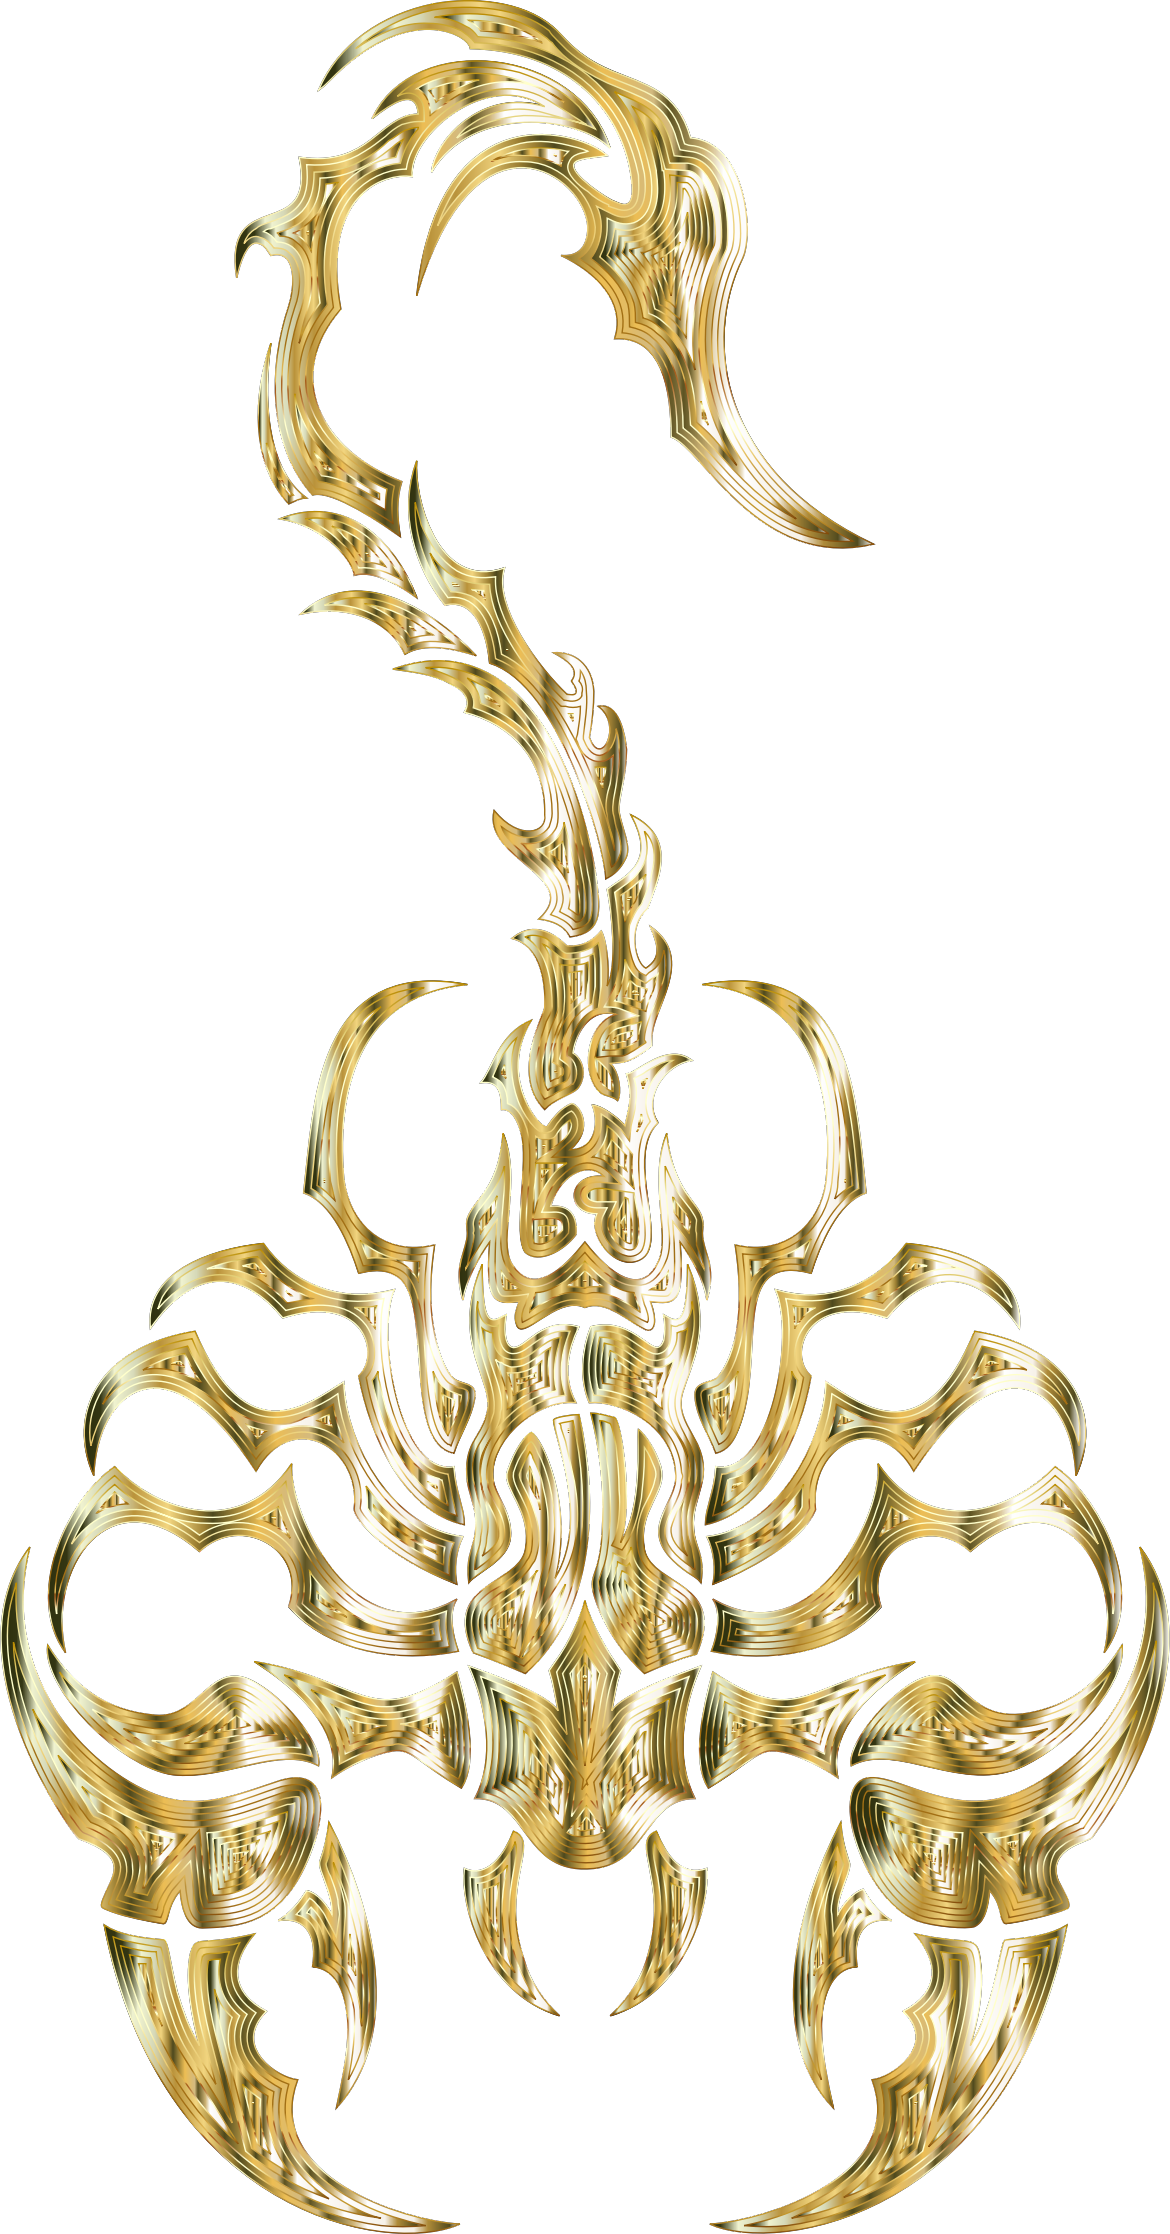 A Gold Scorpion On A Black Background